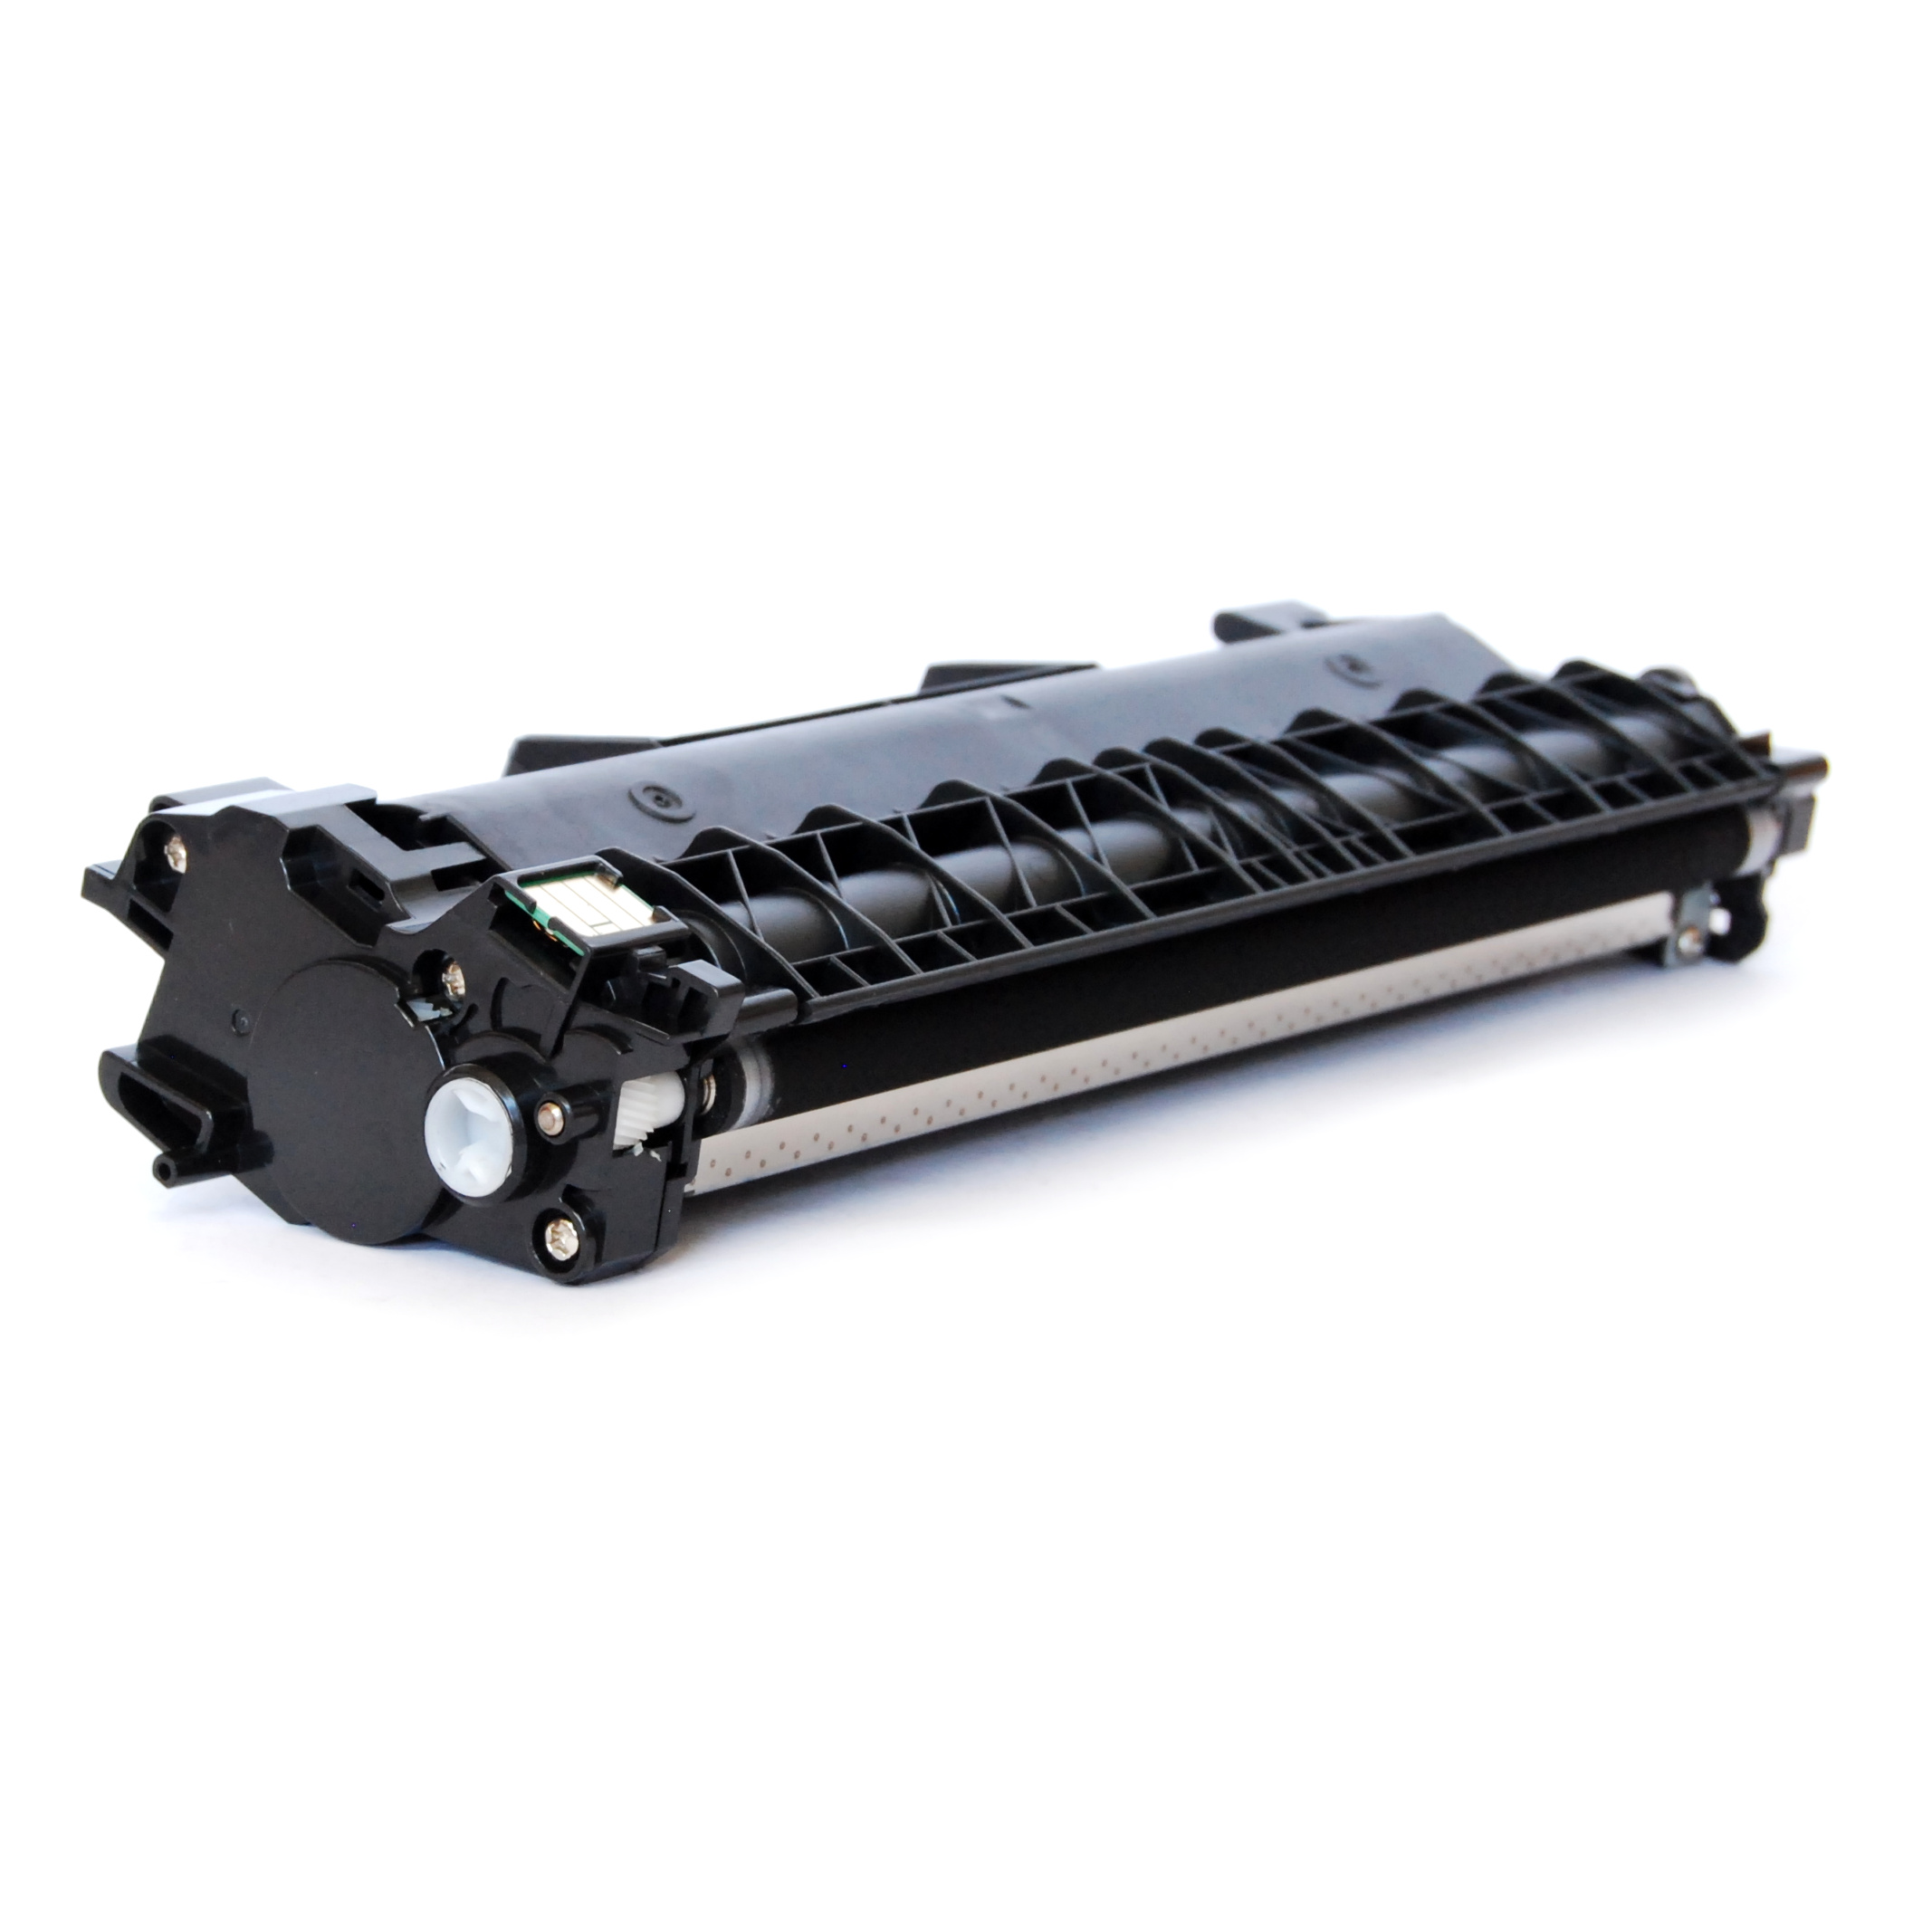 TONER DO BROTHER DCP-L2530DW DCP-L2550DN TN2420 XL - Sklep, Opinie